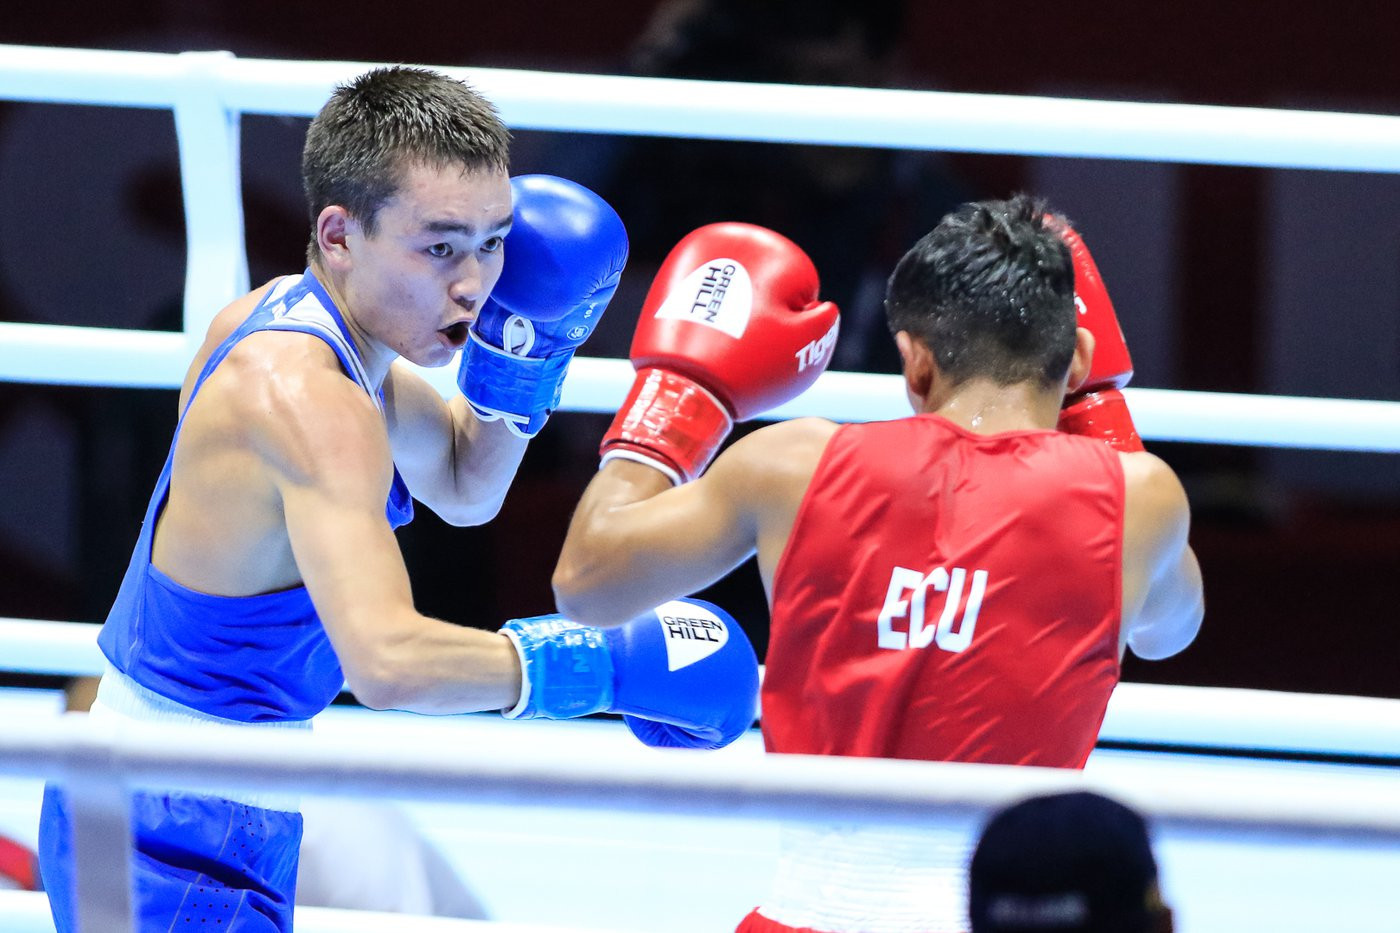 Russia's Vasilii Egorov delighted the home crowd with a win against Luis Delgado of Ecuador ©Yekaterinburg 2019